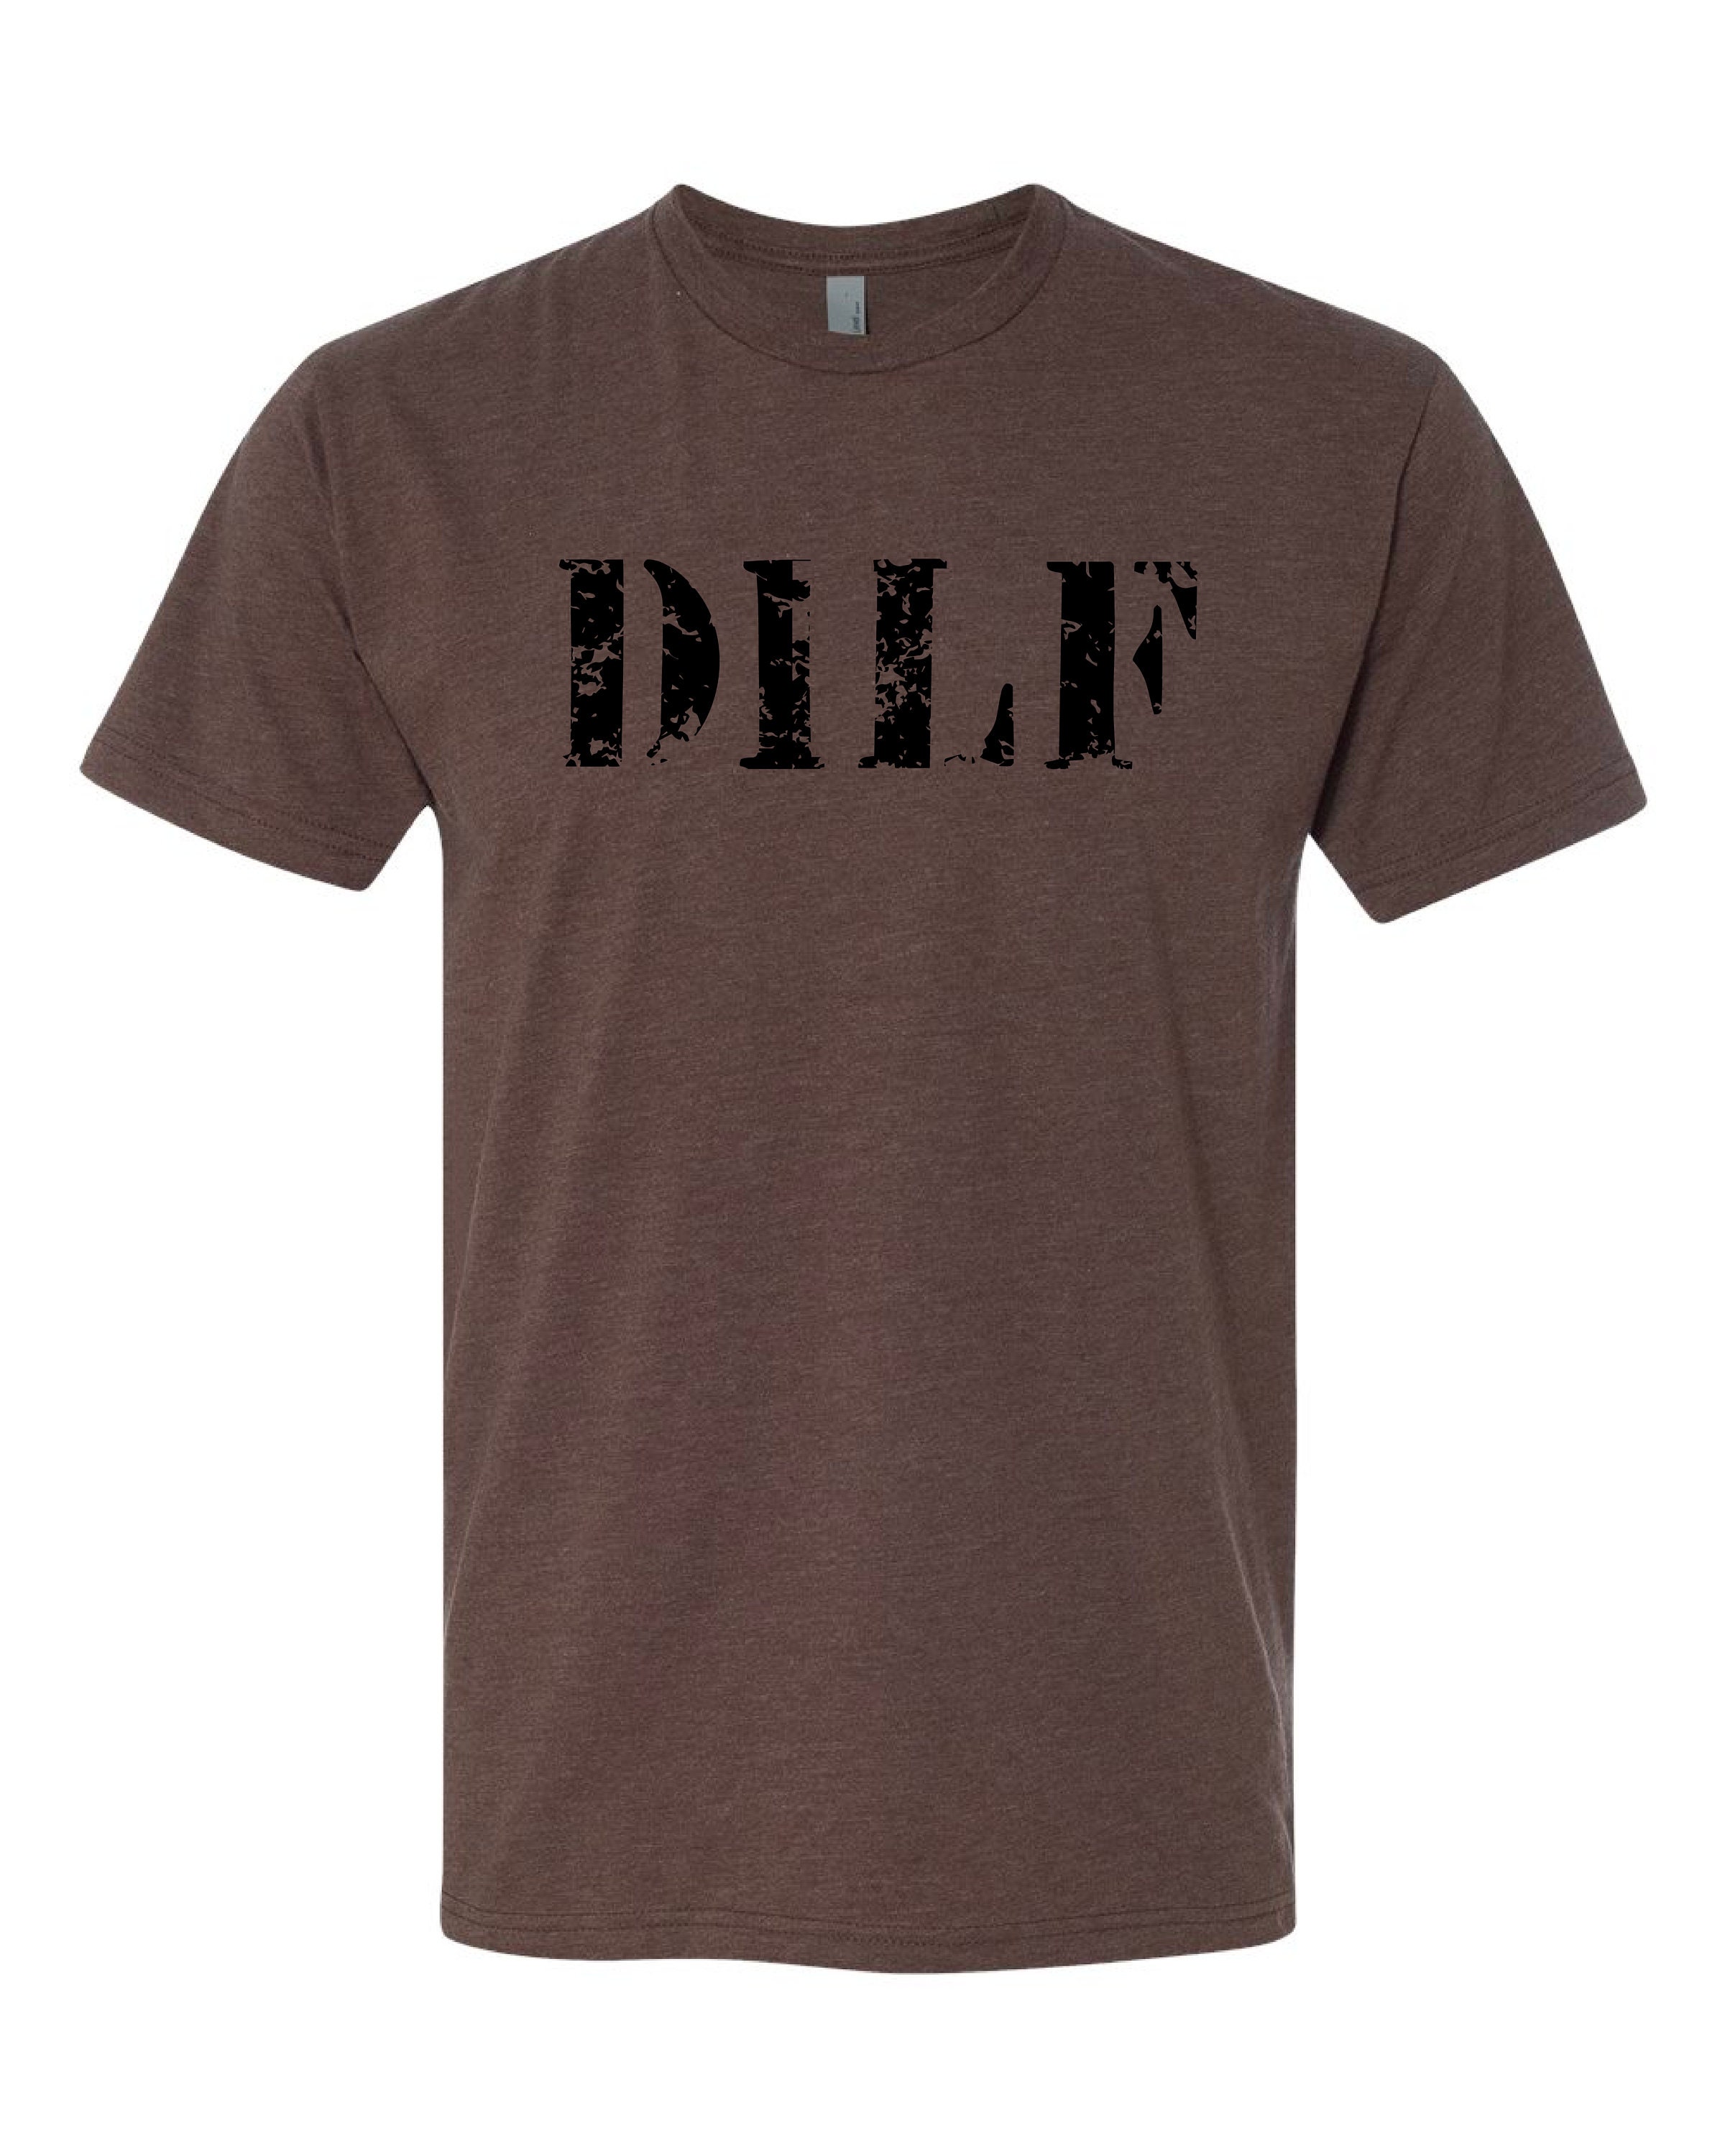 Dilf T-shirt, Funny Father's Shirt, Graphic Tee -  Canada